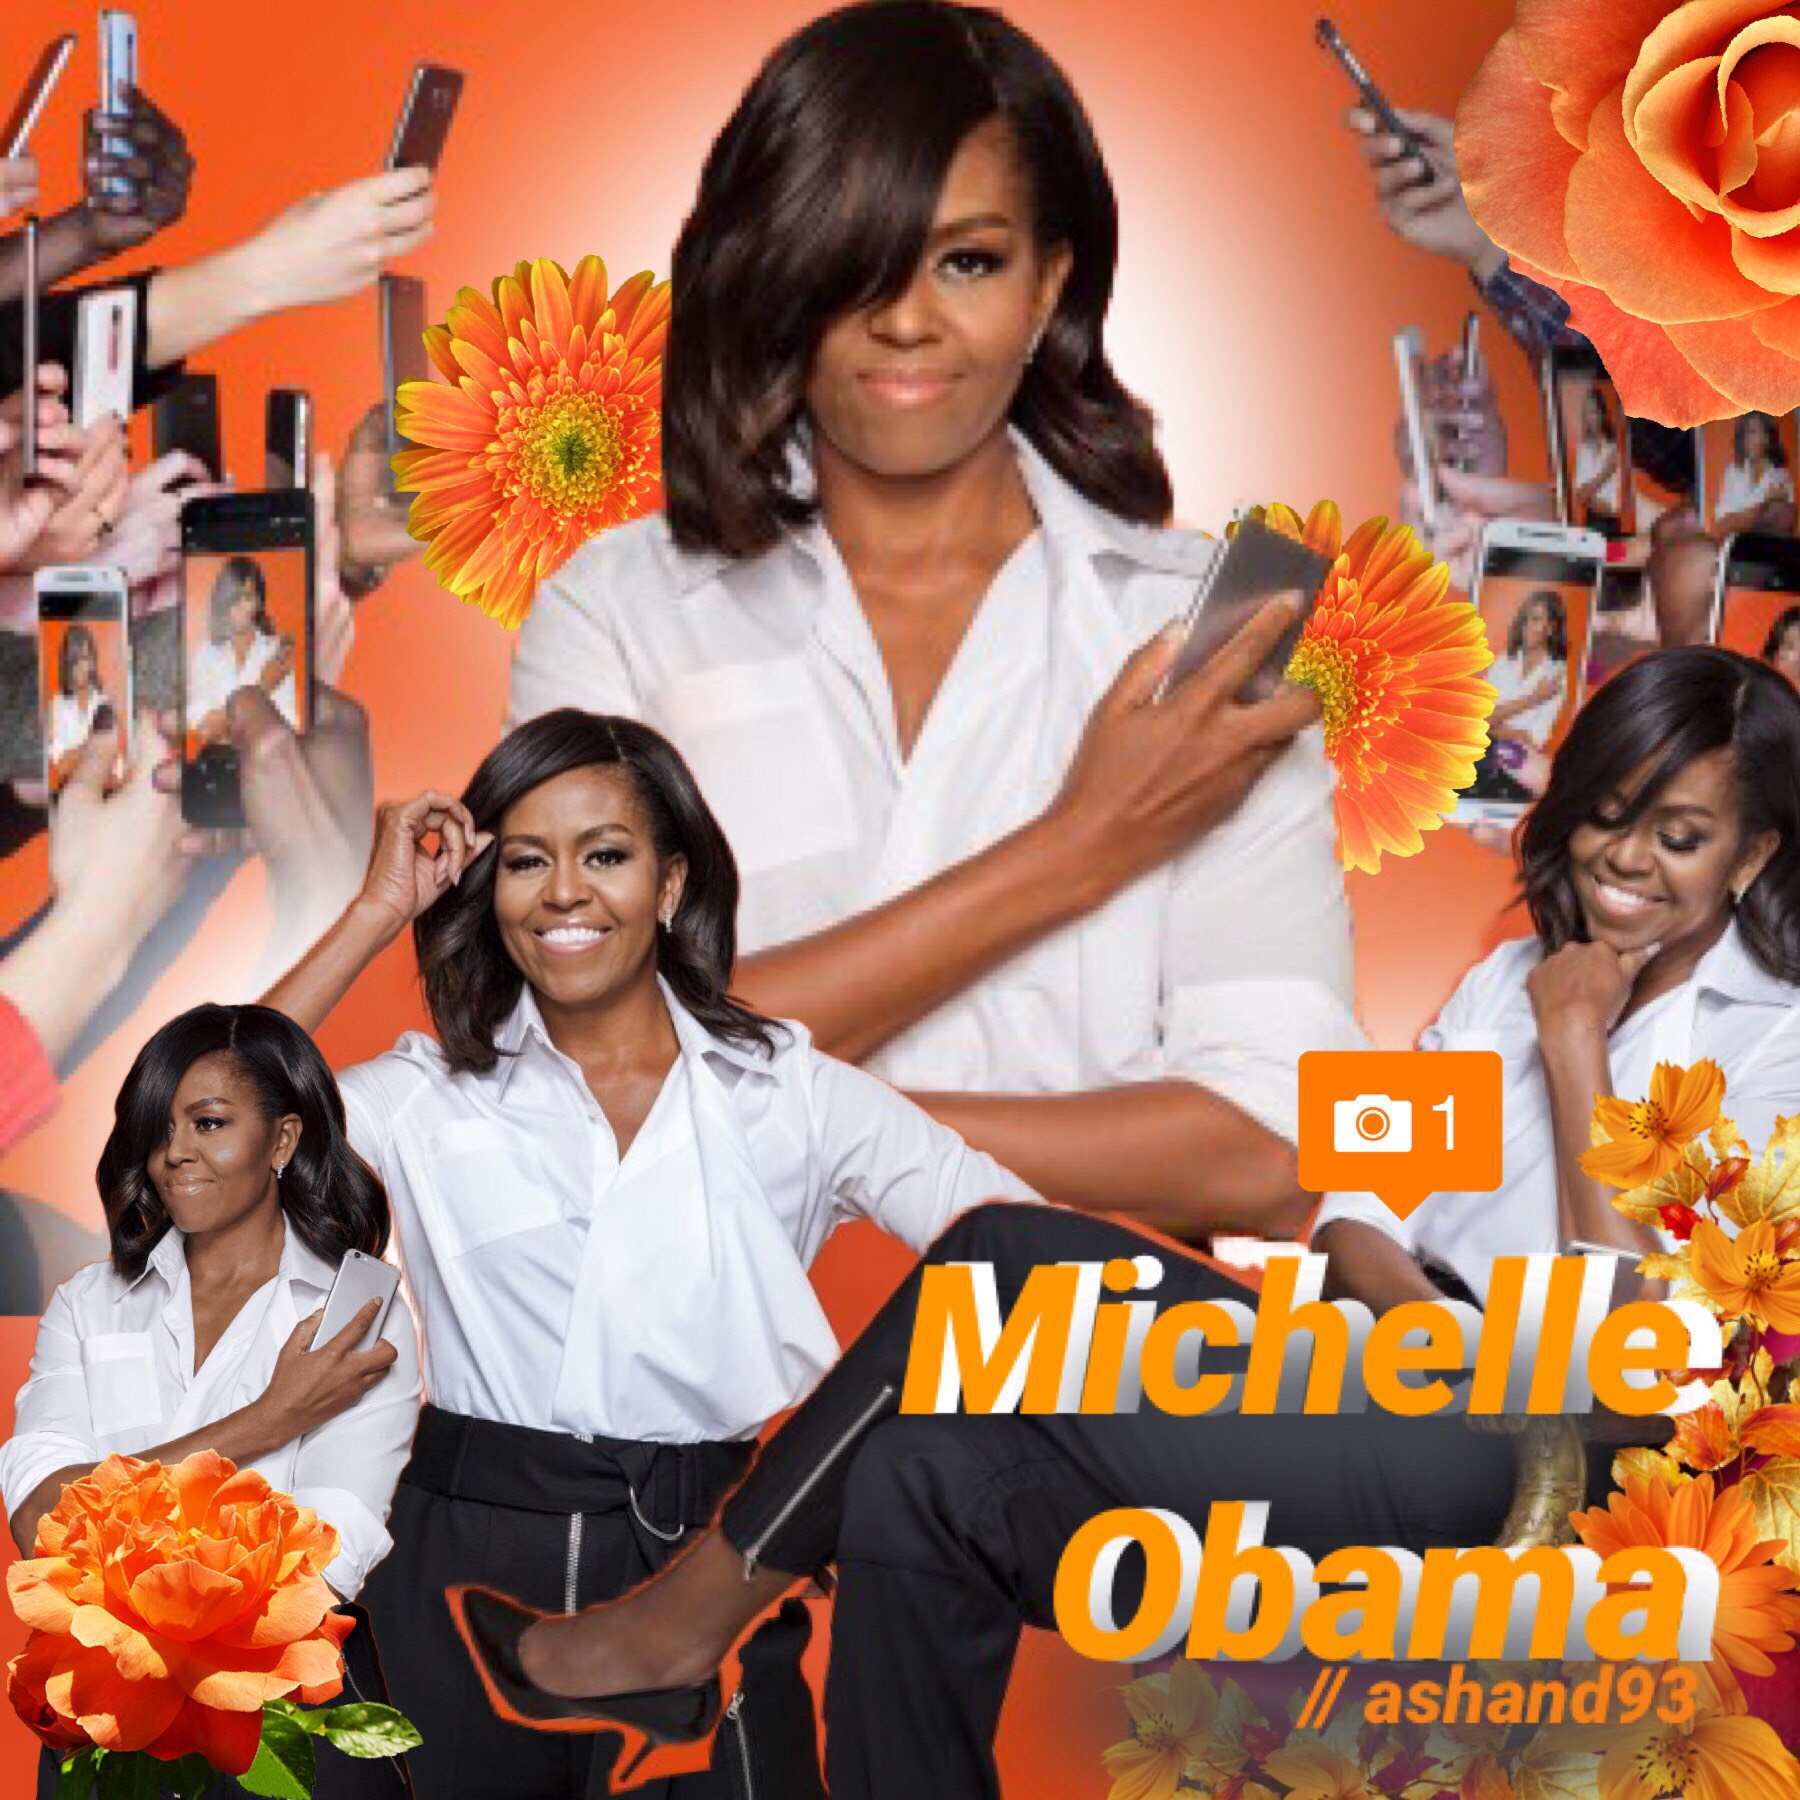 🍊👩🏾‍💼👡
// ashand93 
Politics aside.. she put a very high standard to the title of First Lady ✨